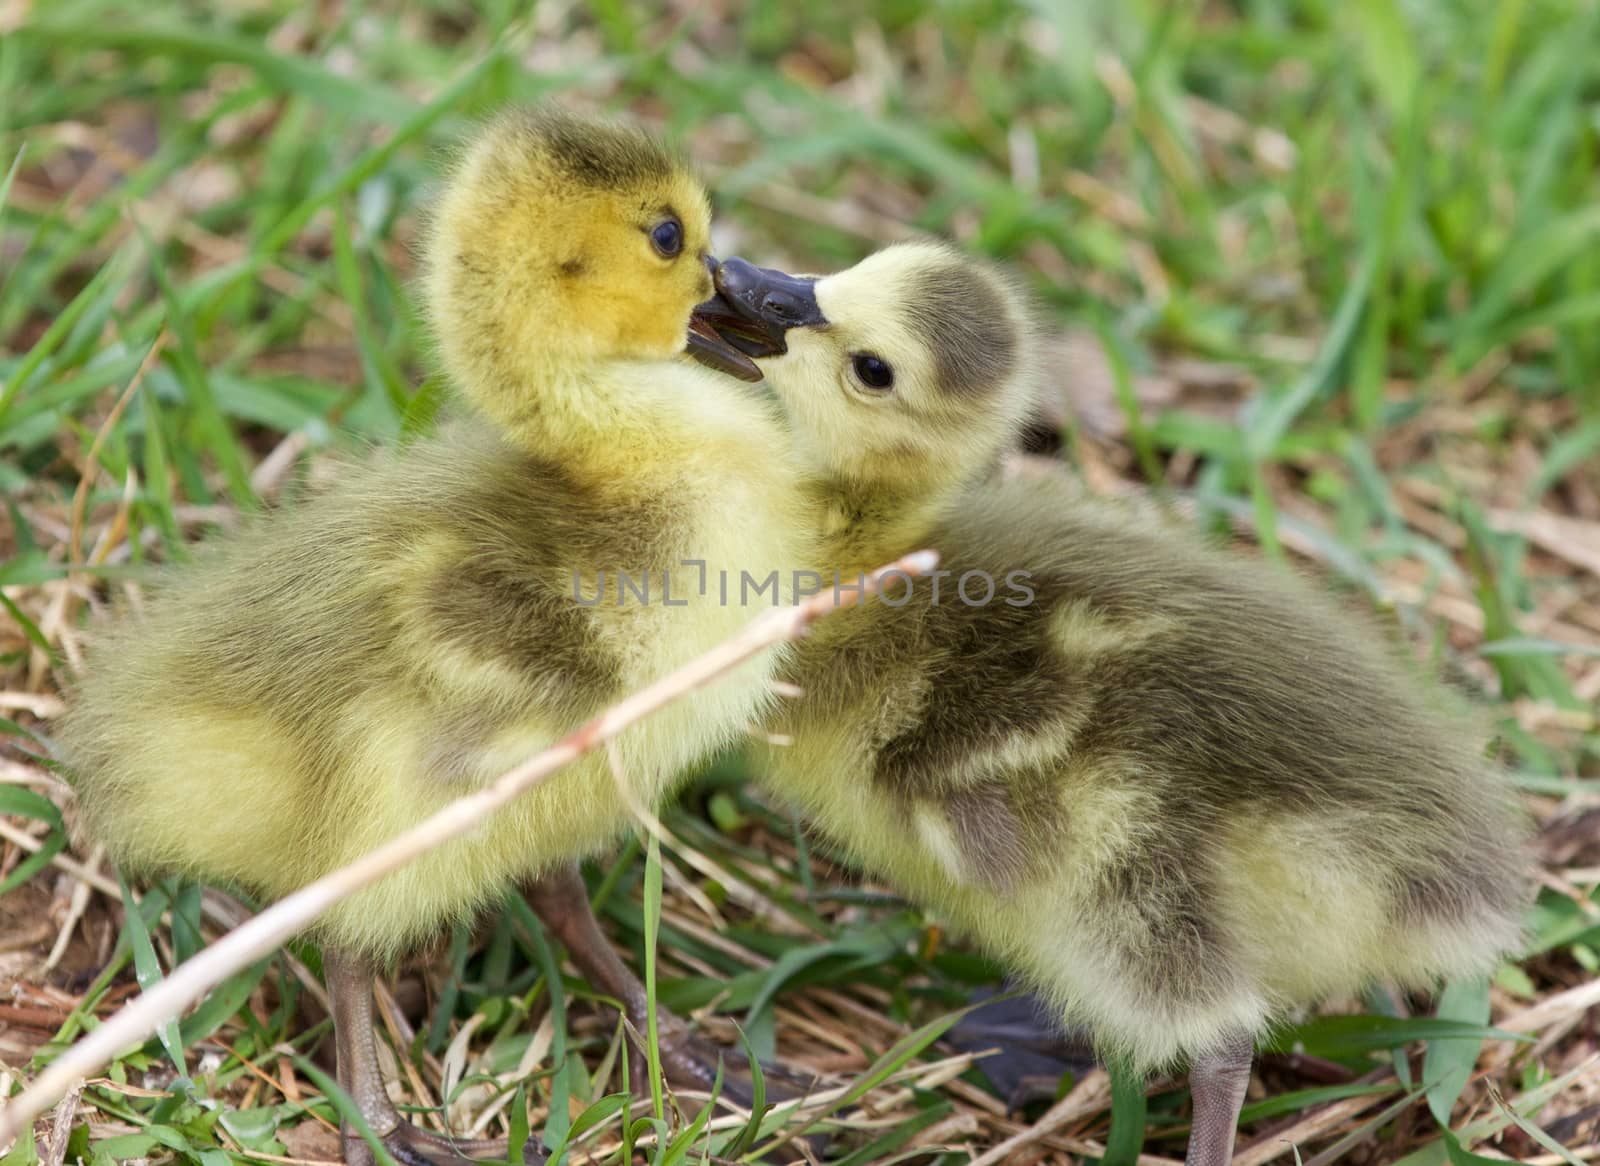 Funny photo of kissing young cute chicks of the Canada geese